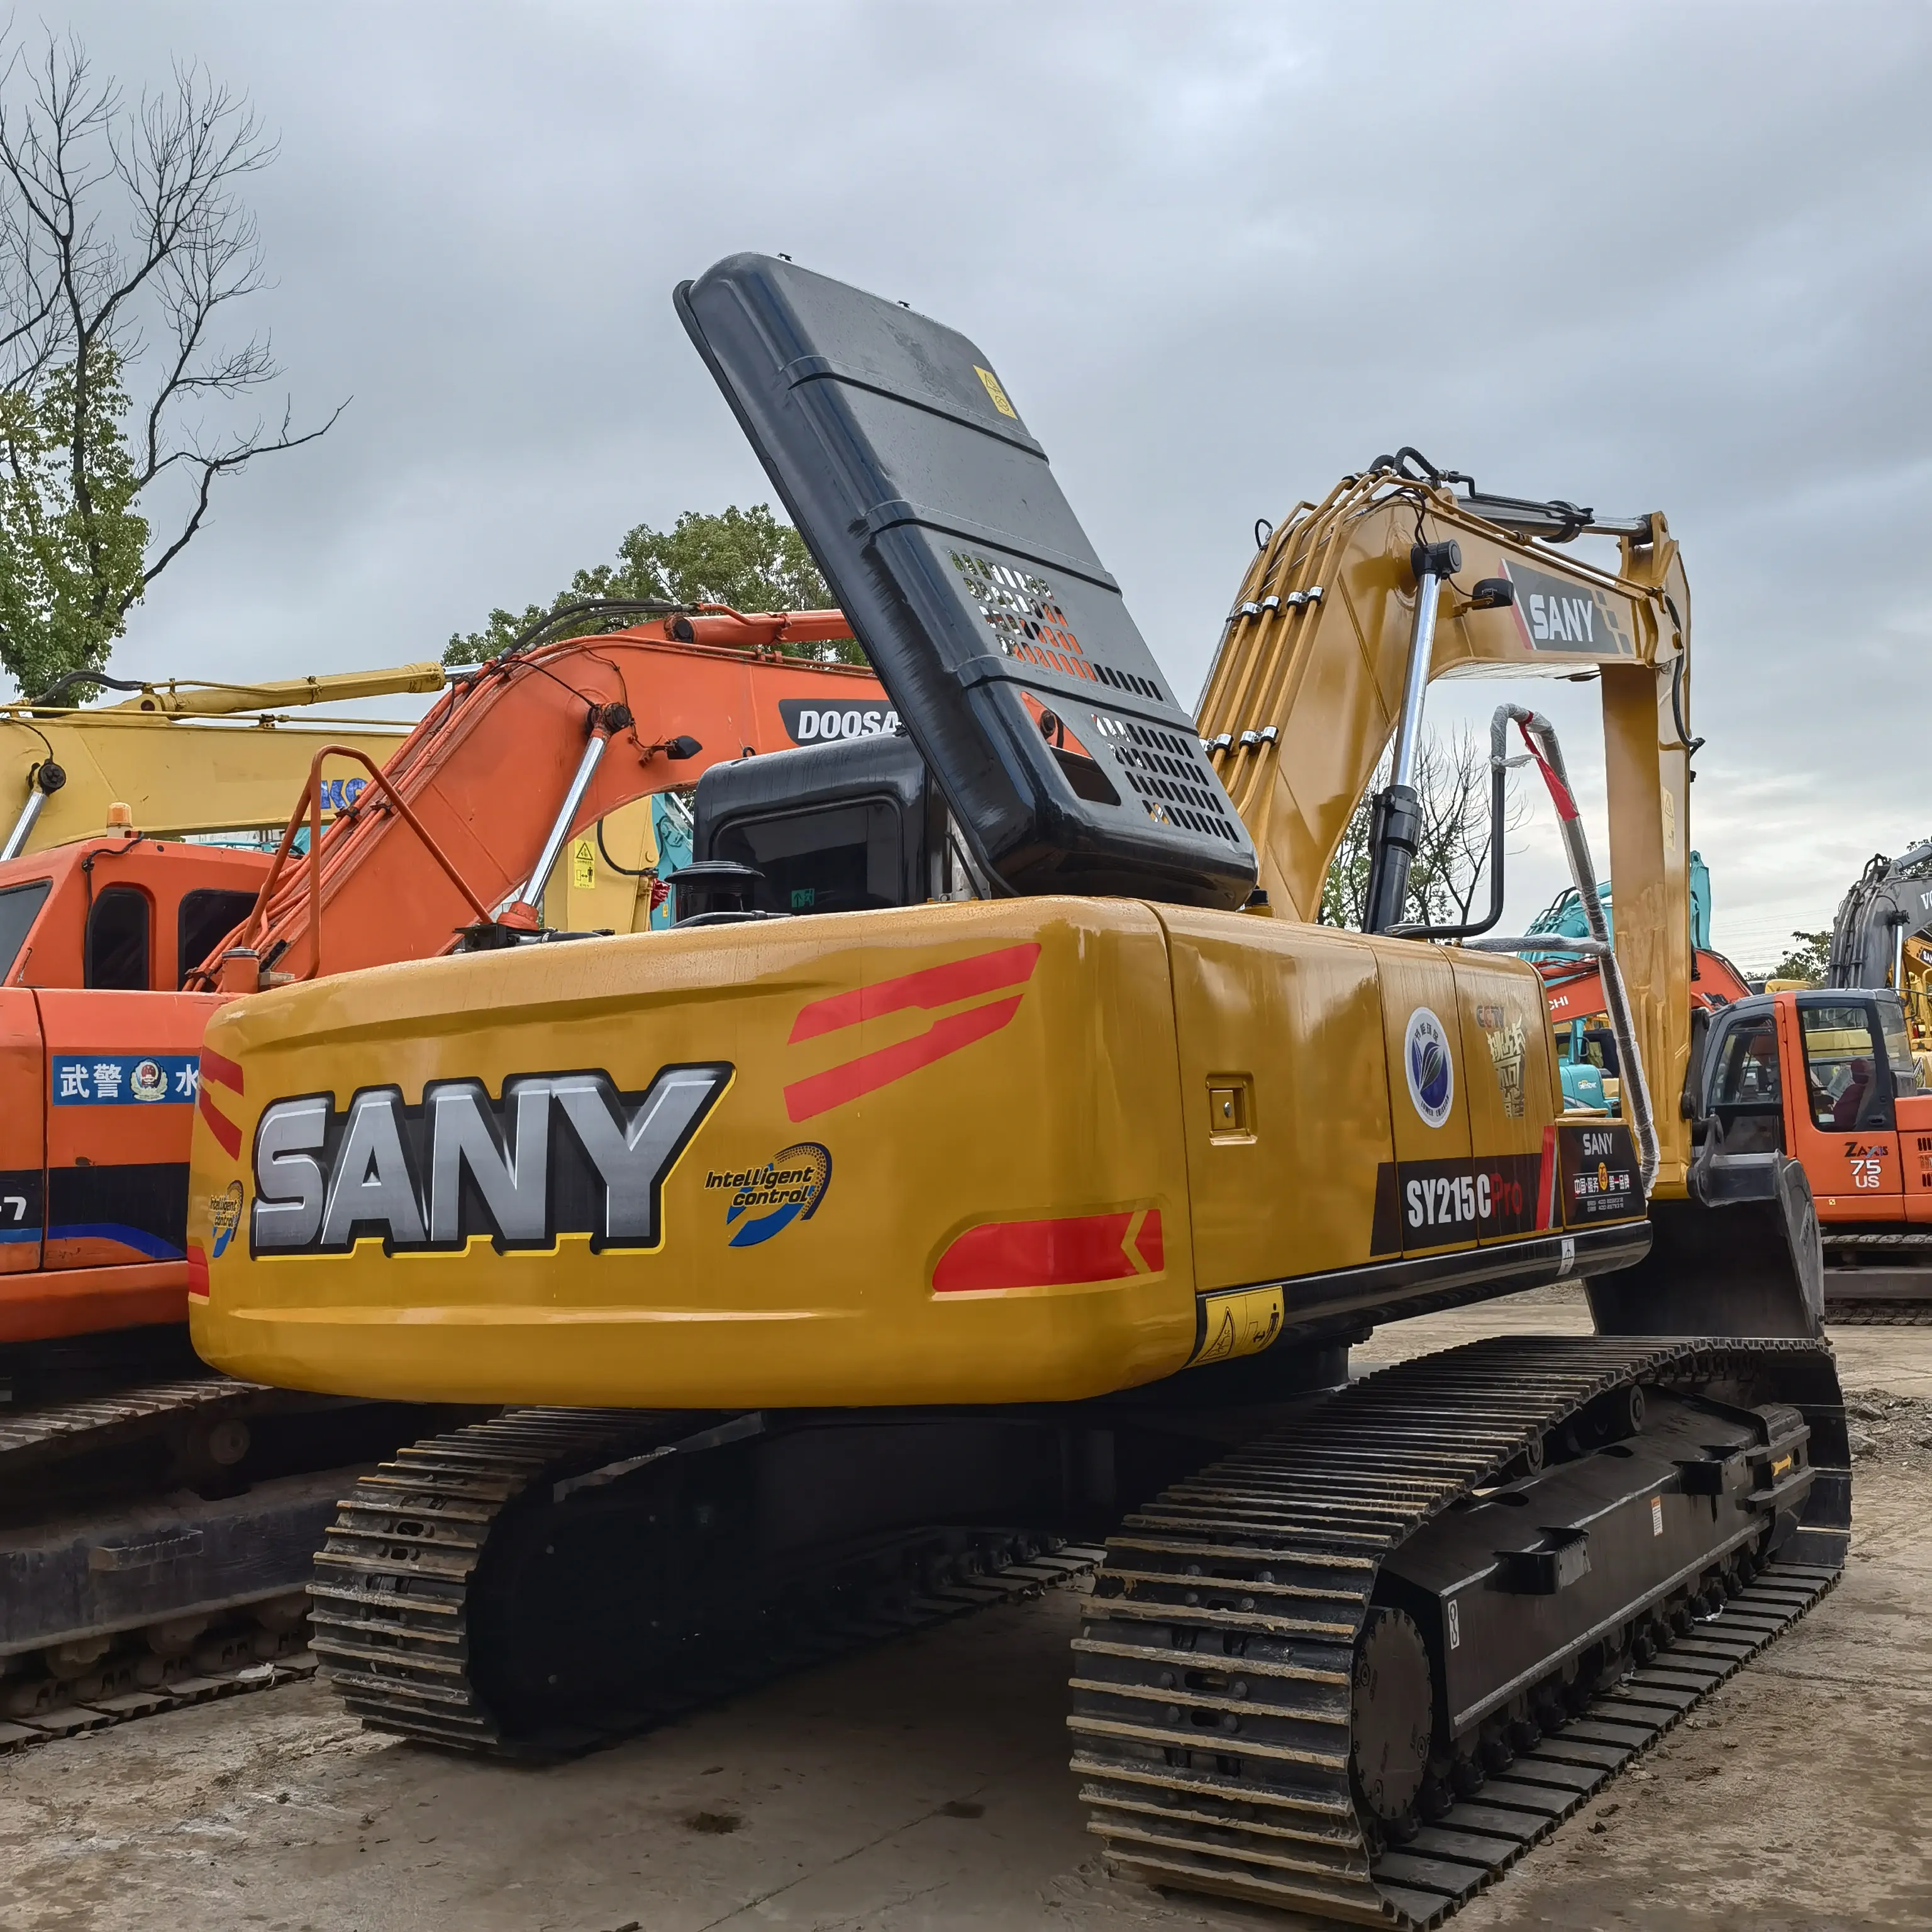 used Sany sy215 crawler excavator for sale construction machinery high quality low price used excavator cheap sale